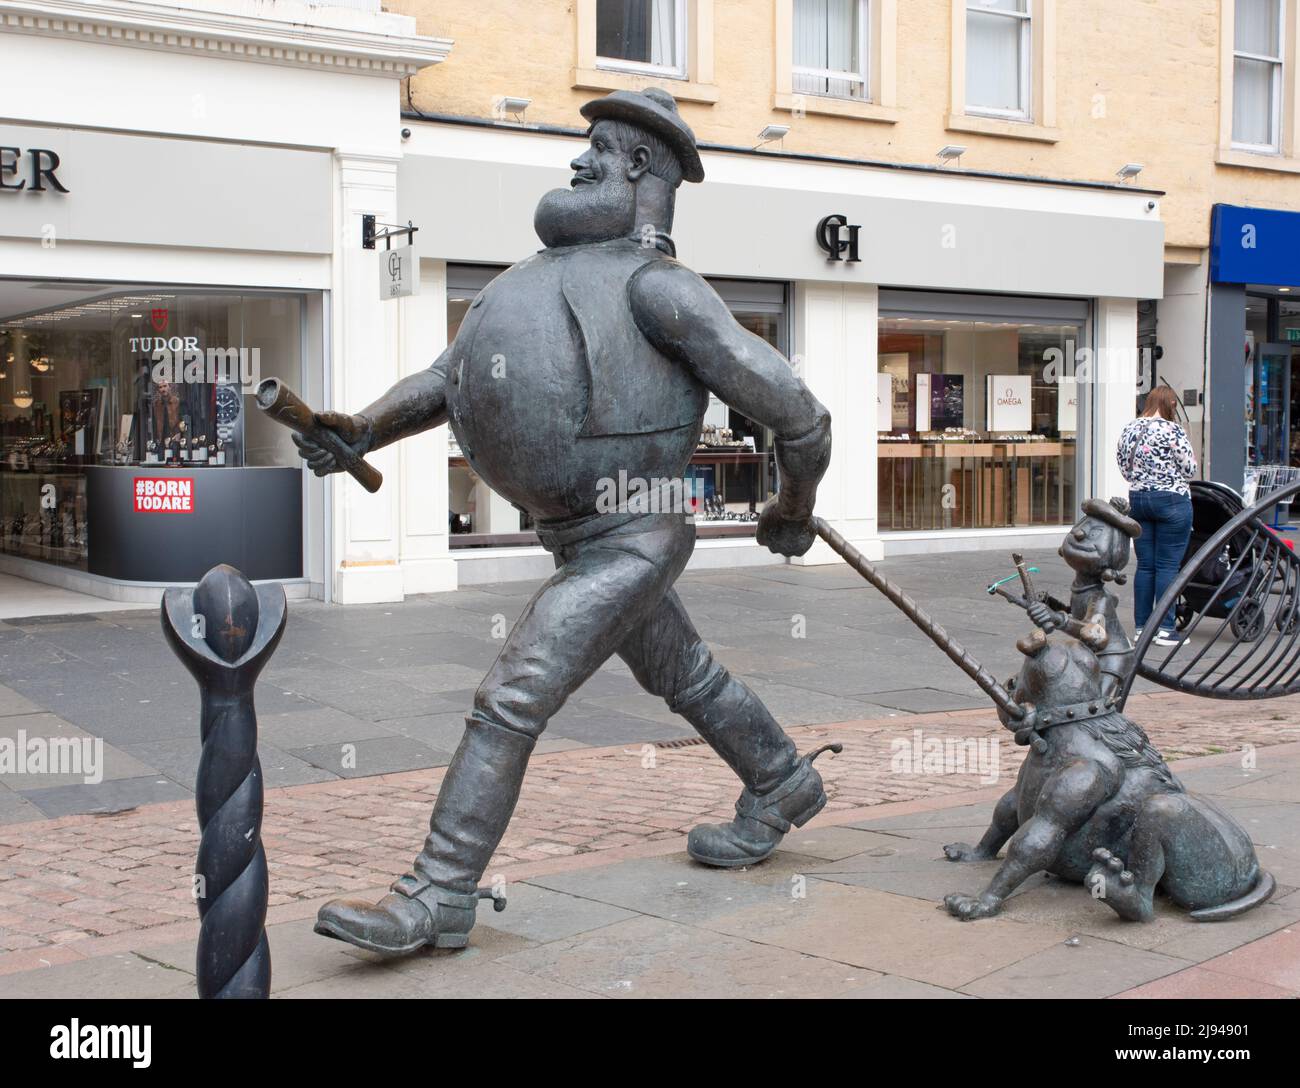 Statue of Desperate Dan and Dawg the dog and Minnie the Minx in City Square Dundee Stock Photo